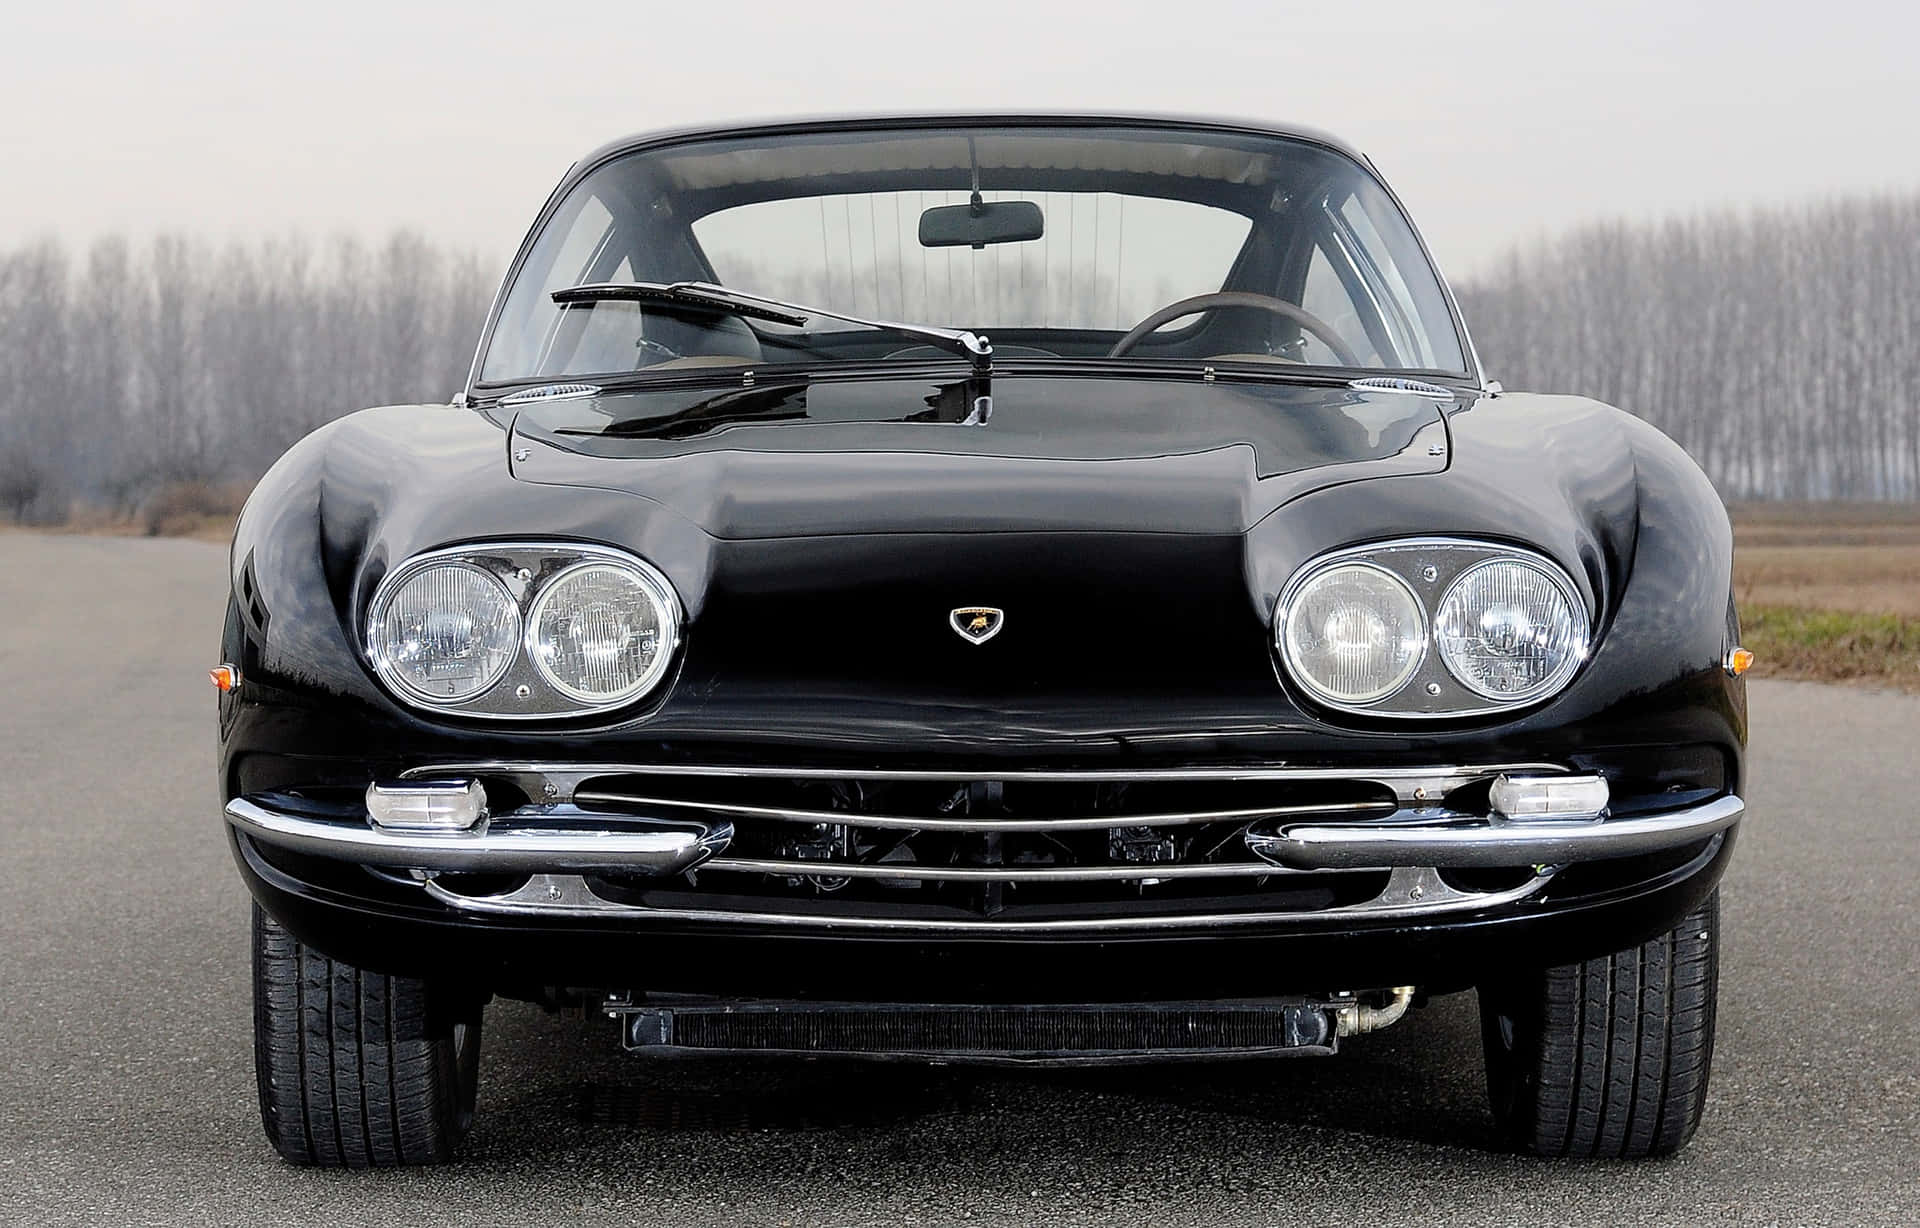 A Glorious View Of The Lamborghini 400 Gt Against A Fiery Skyline Wallpaper